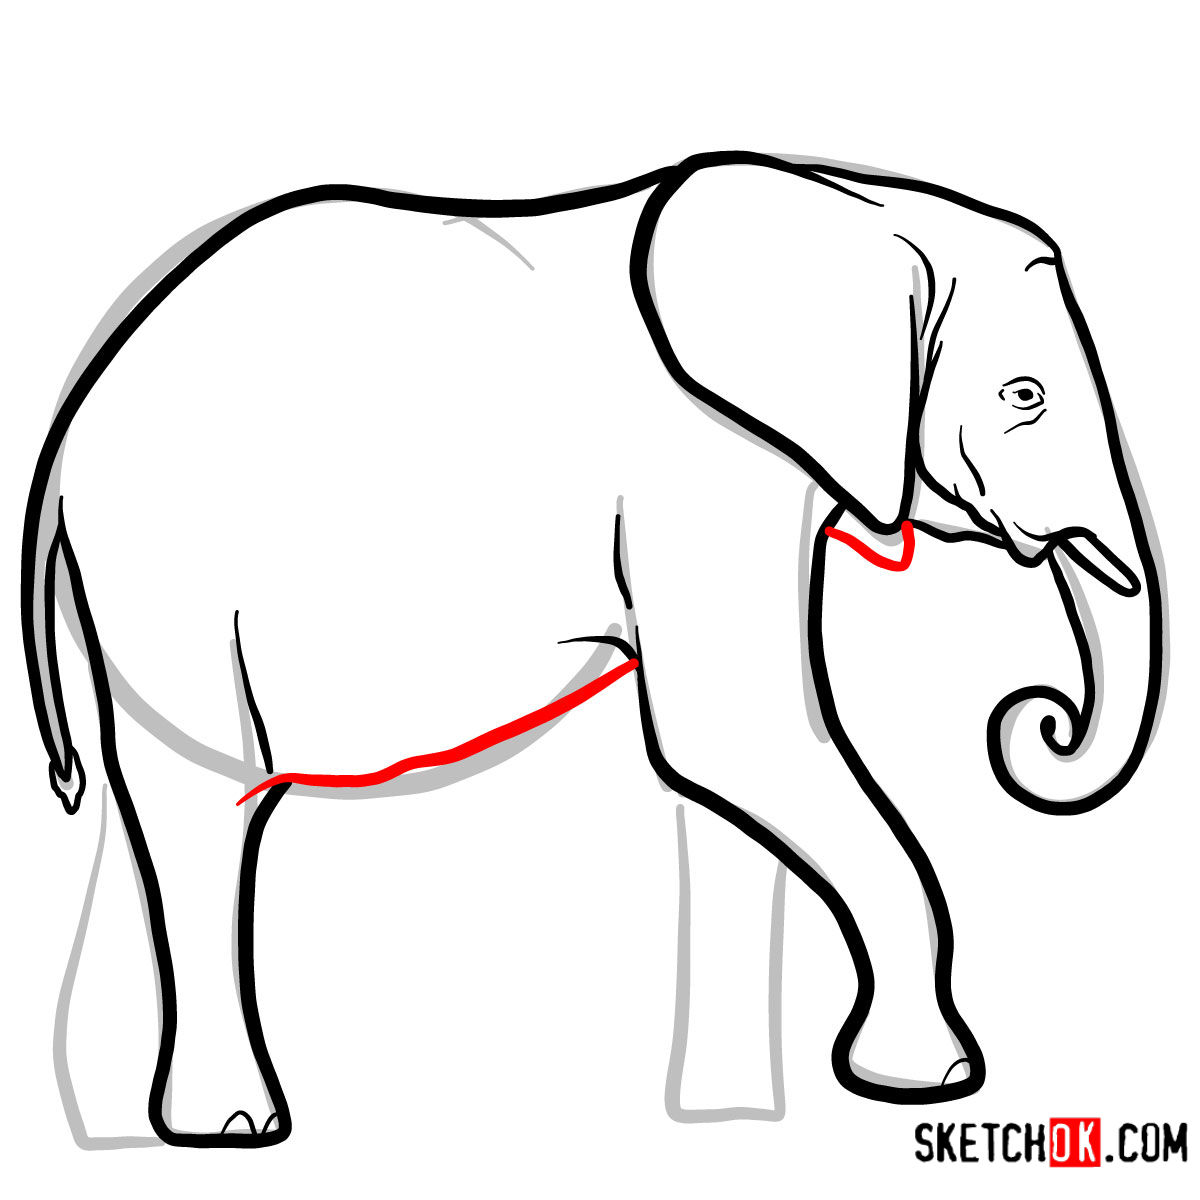 Best Easy Way To Draw Elephant  Viral Drawing Video  Best Easy Way To Draw  Elephant  Viral Drawing Video  By AP Drawing  Facebook